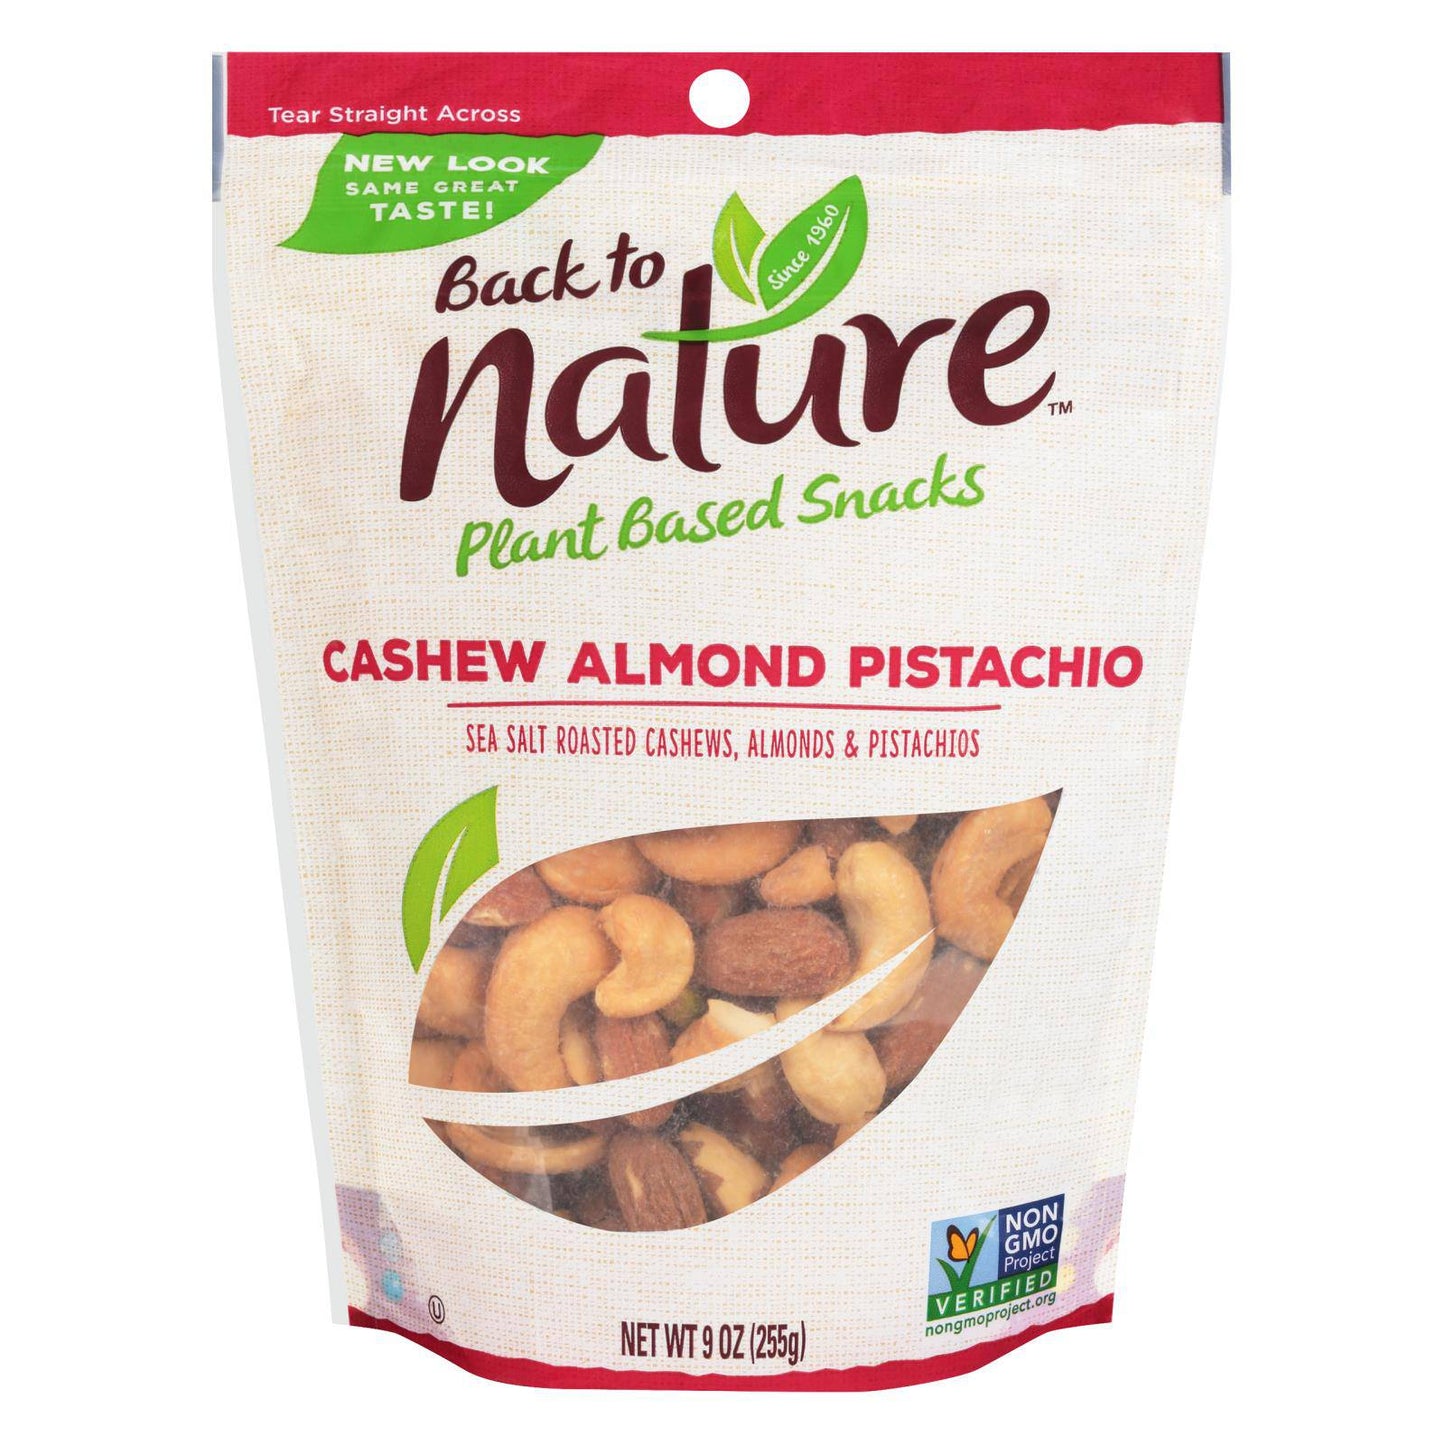 Back To Nature Cashew Almond Pistachio Mix - Case Of 9 - 9 Oz. | OnlyNaturals.us